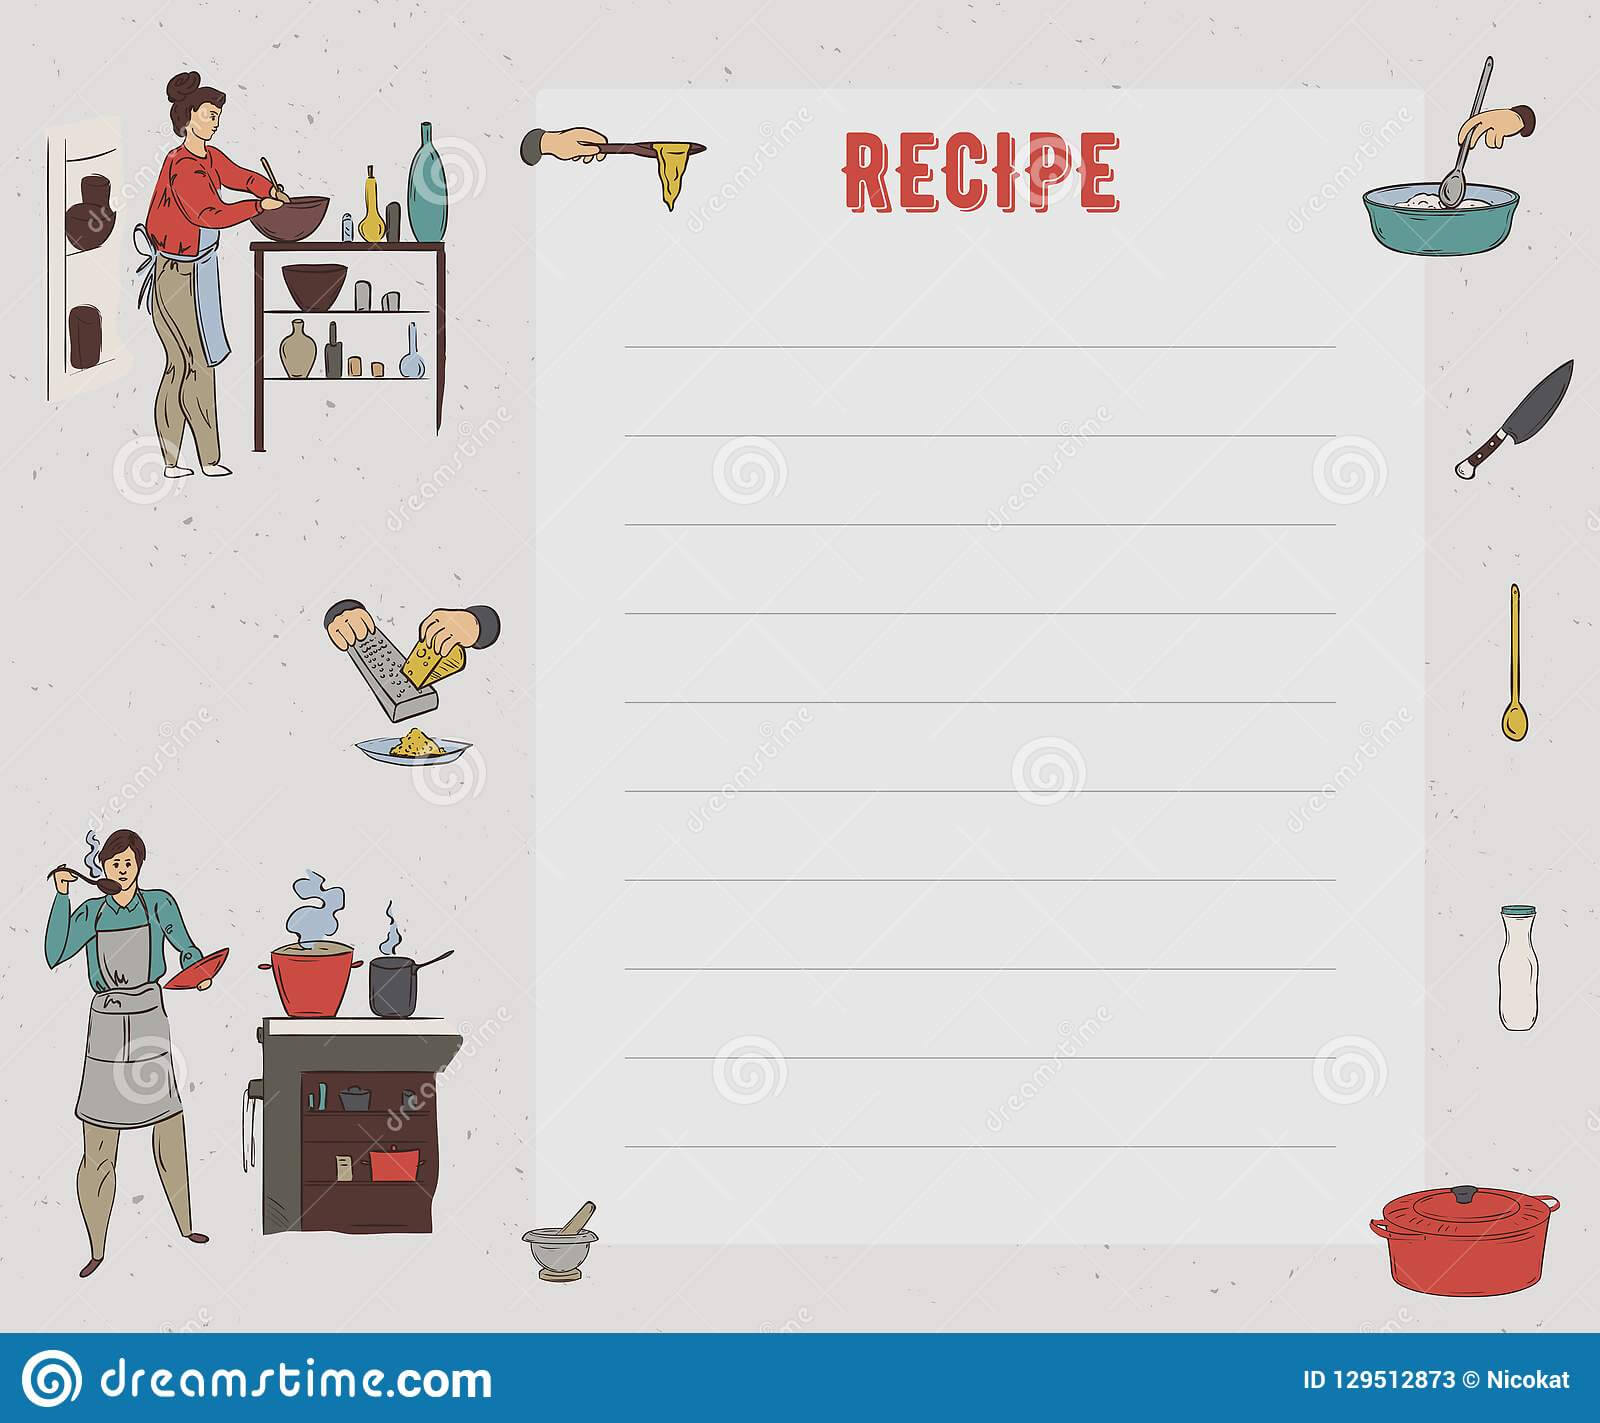 Recipe Card. Cookbook Page. Design Template With People Pertaining To Restaurant Recipe Card Template